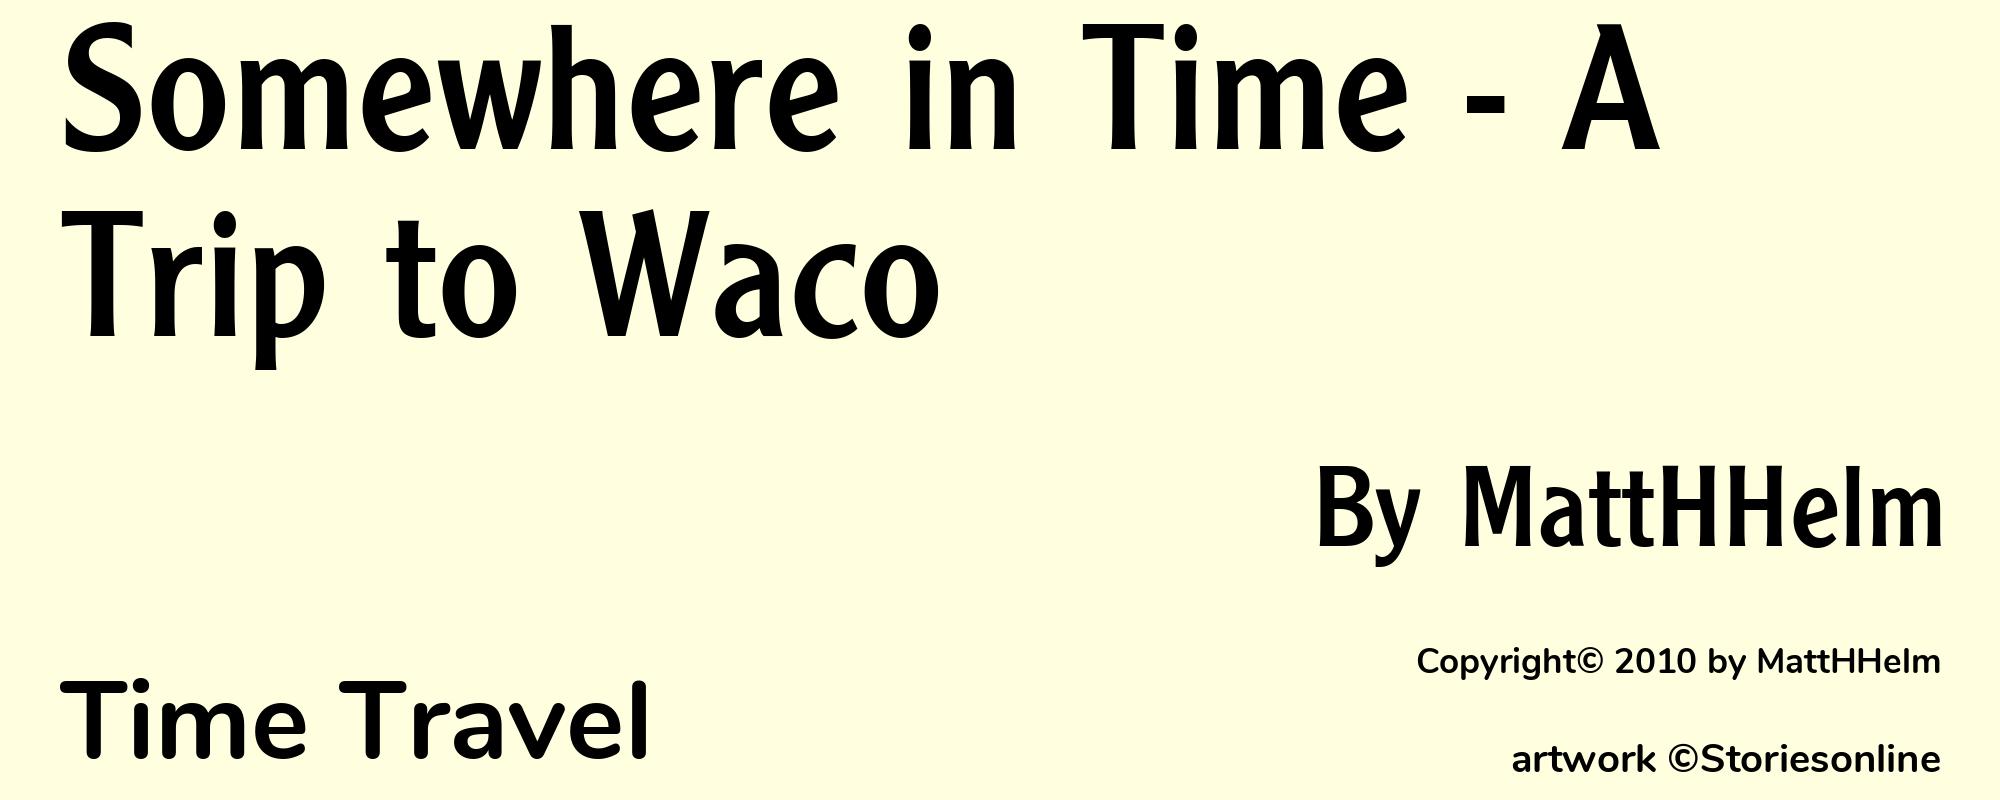 Somewhere in Time - A Trip to Waco - Cover